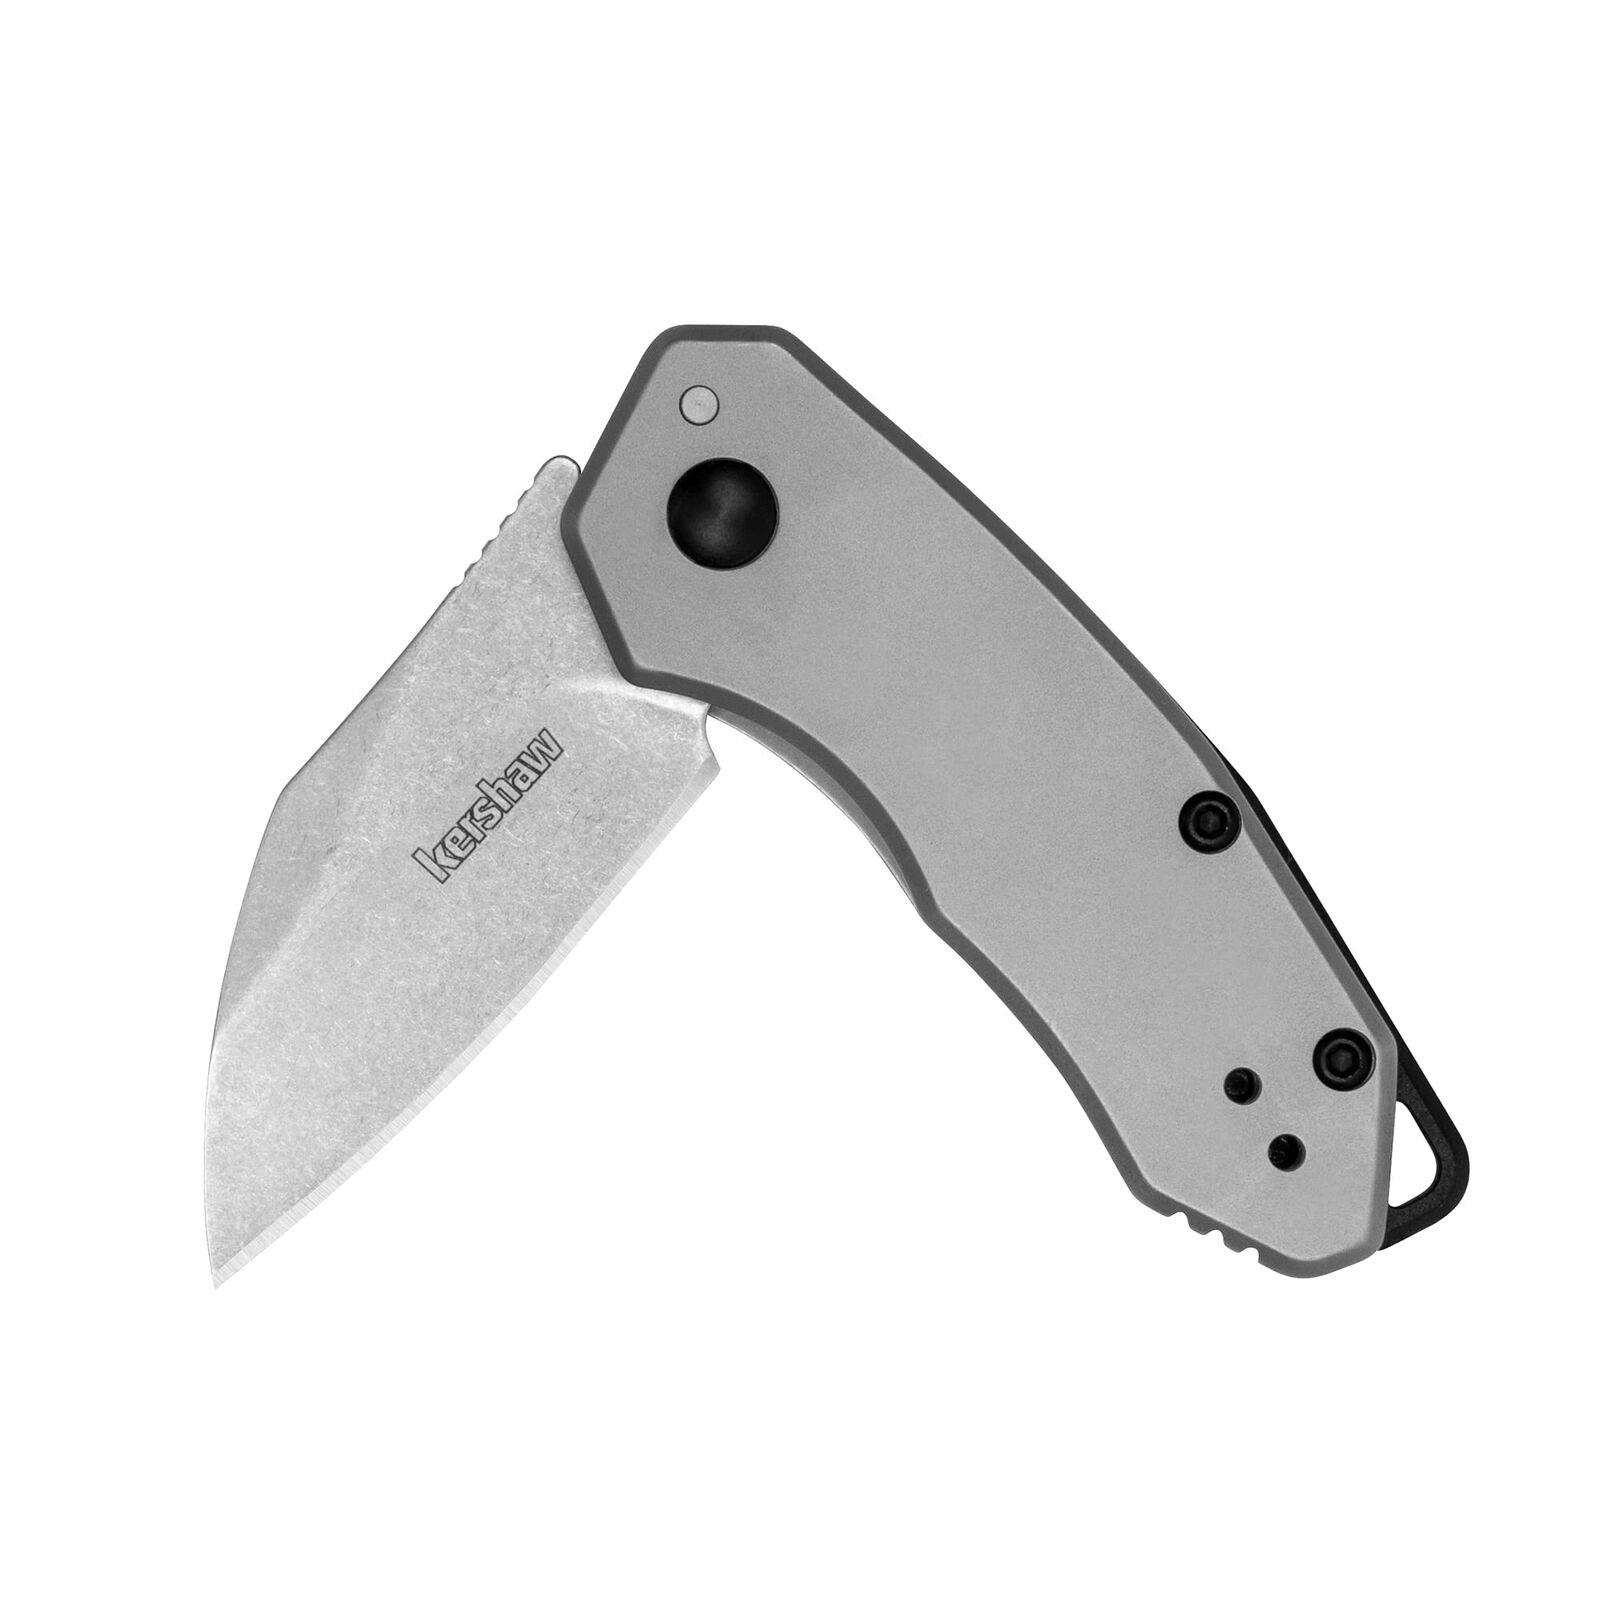 Kershaw Rate Folding Pocket Knife, Small Everyday Carry Knife with Assisted